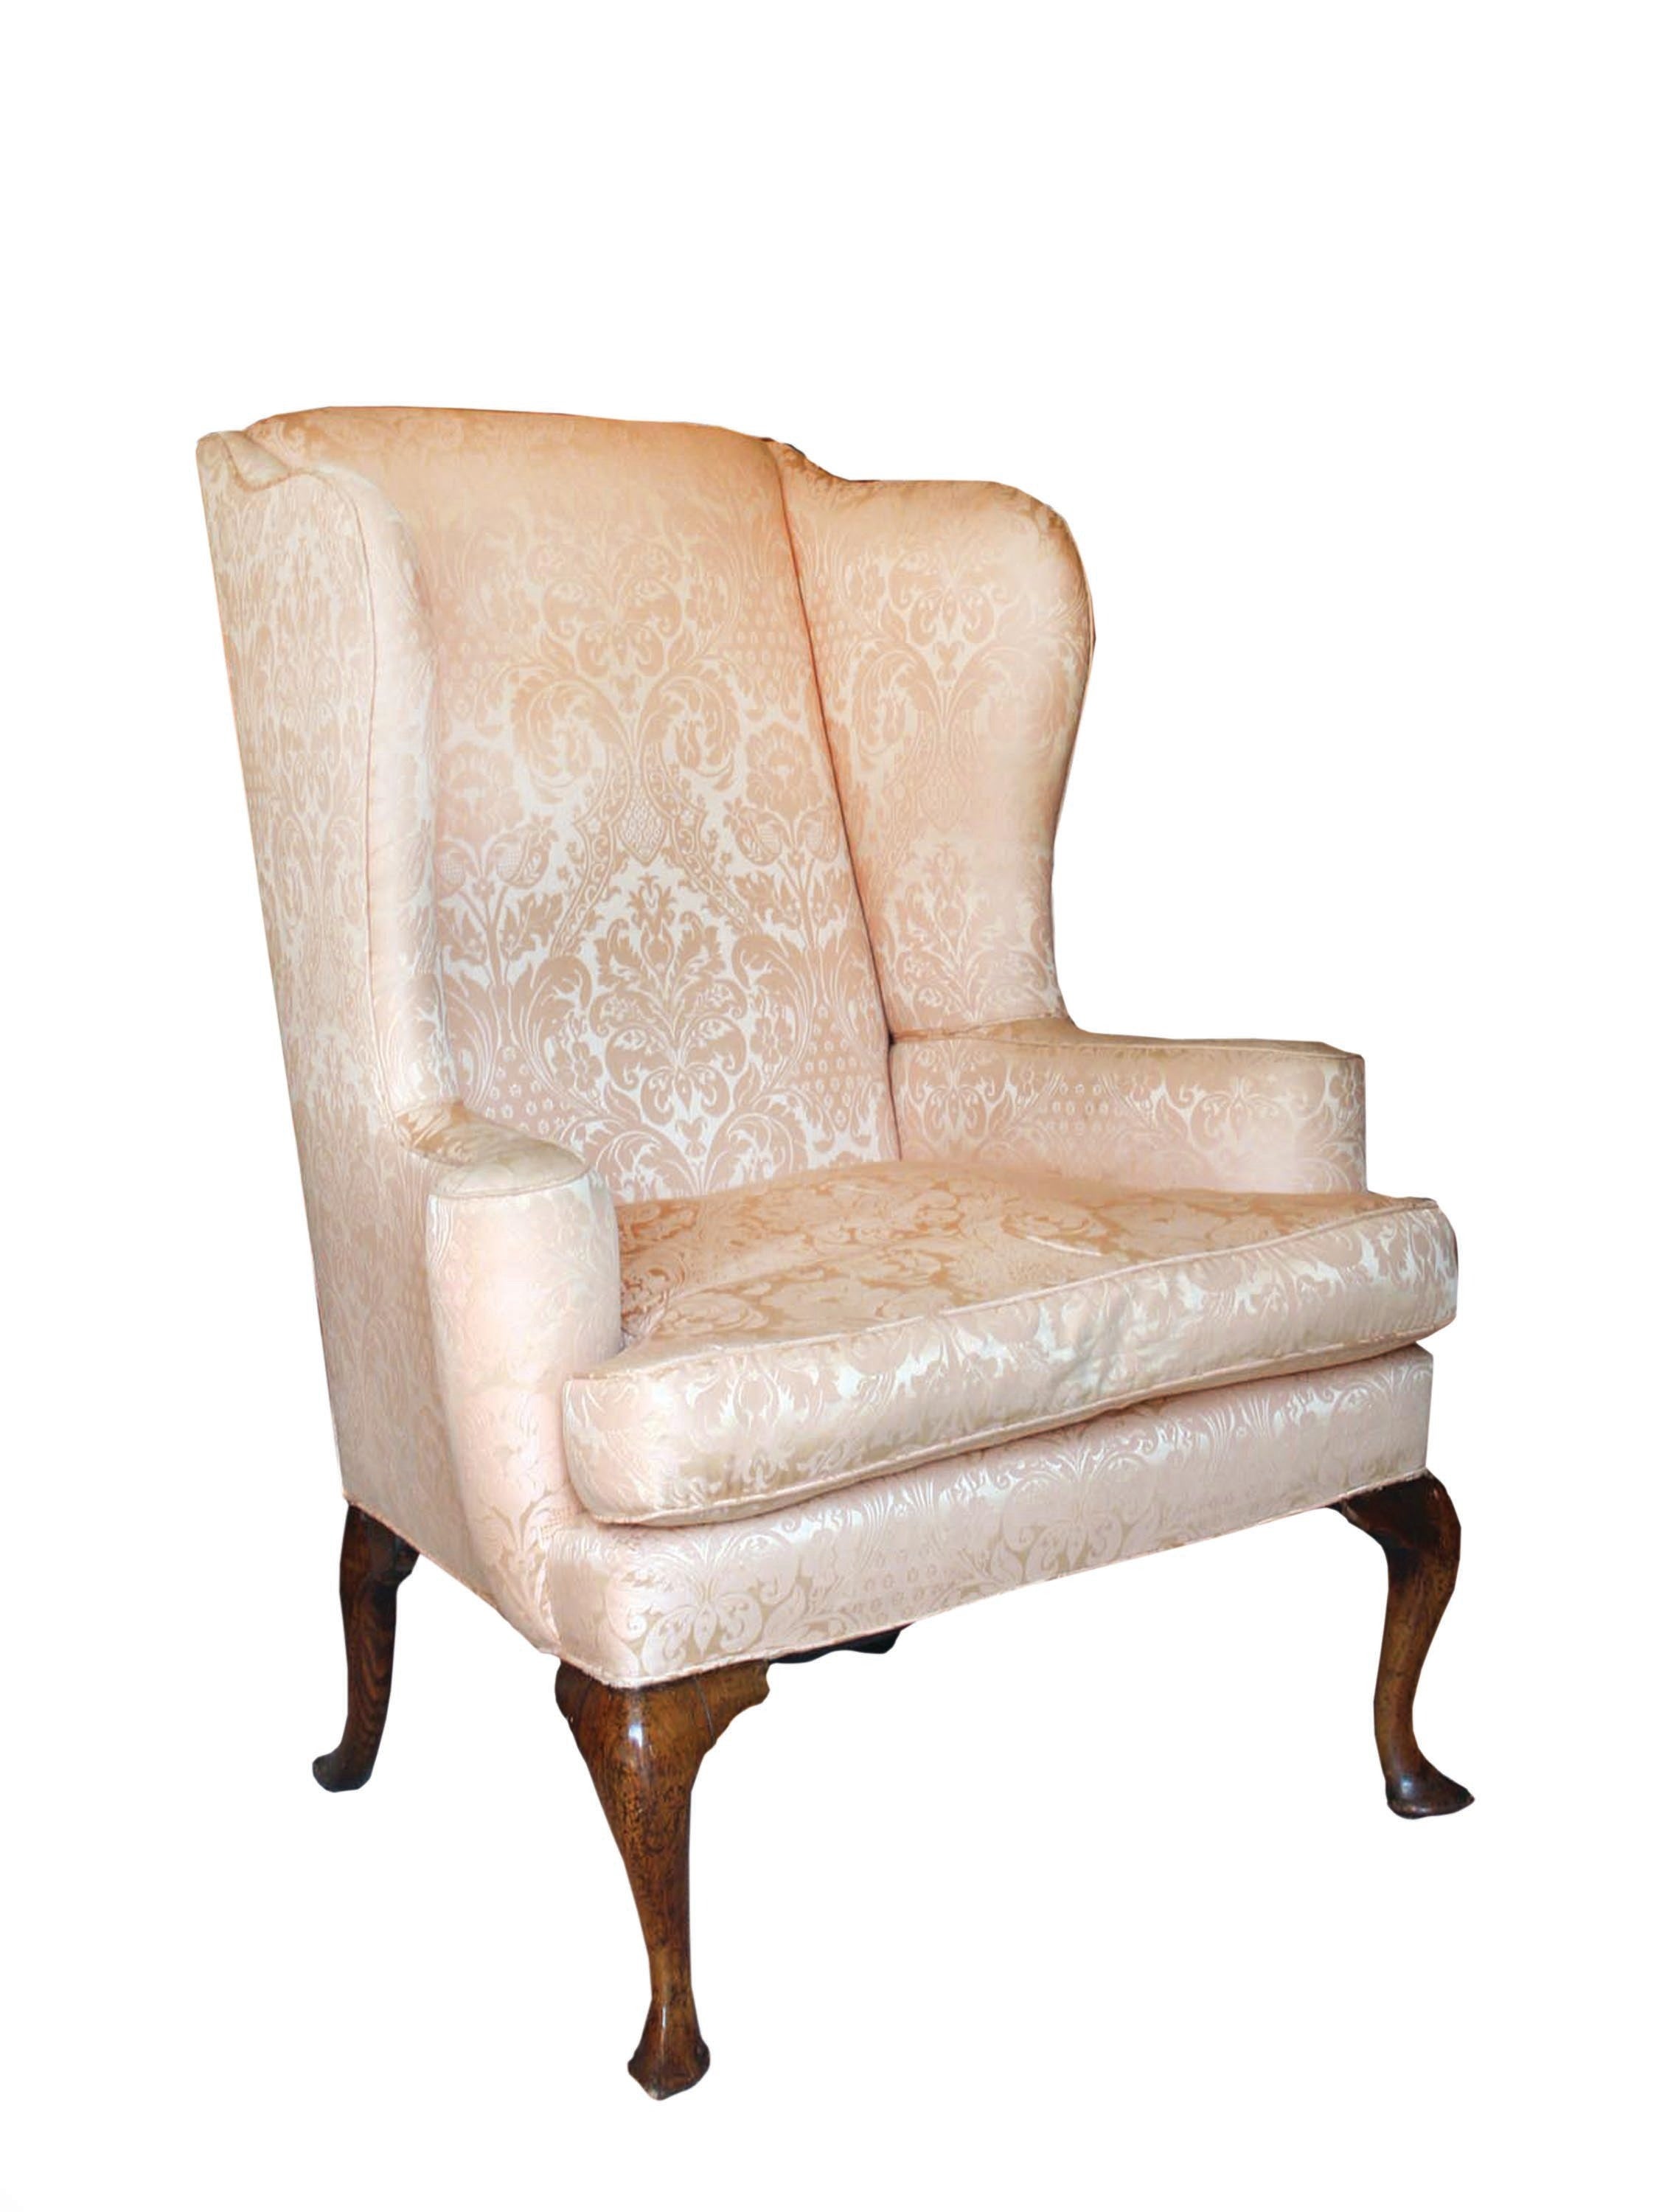 Queen Anne Walnut Wing Chair Early 18th Century